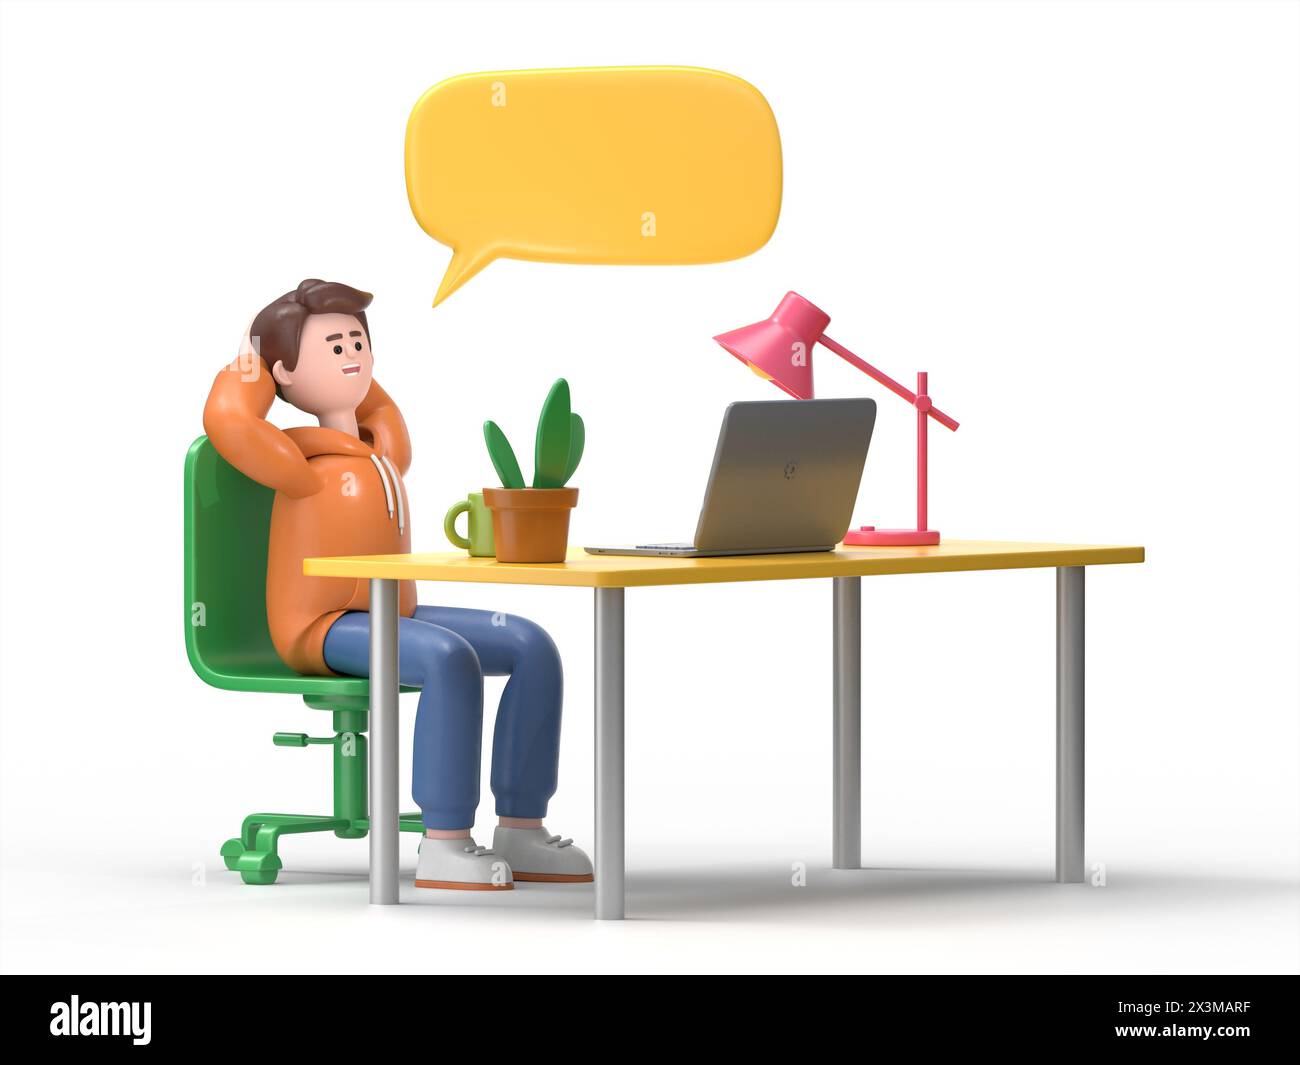 3D illustration of smiling male guy Qadir Business employee bored at work. Office work life concept. 3D rendering on white background. Stock Photo